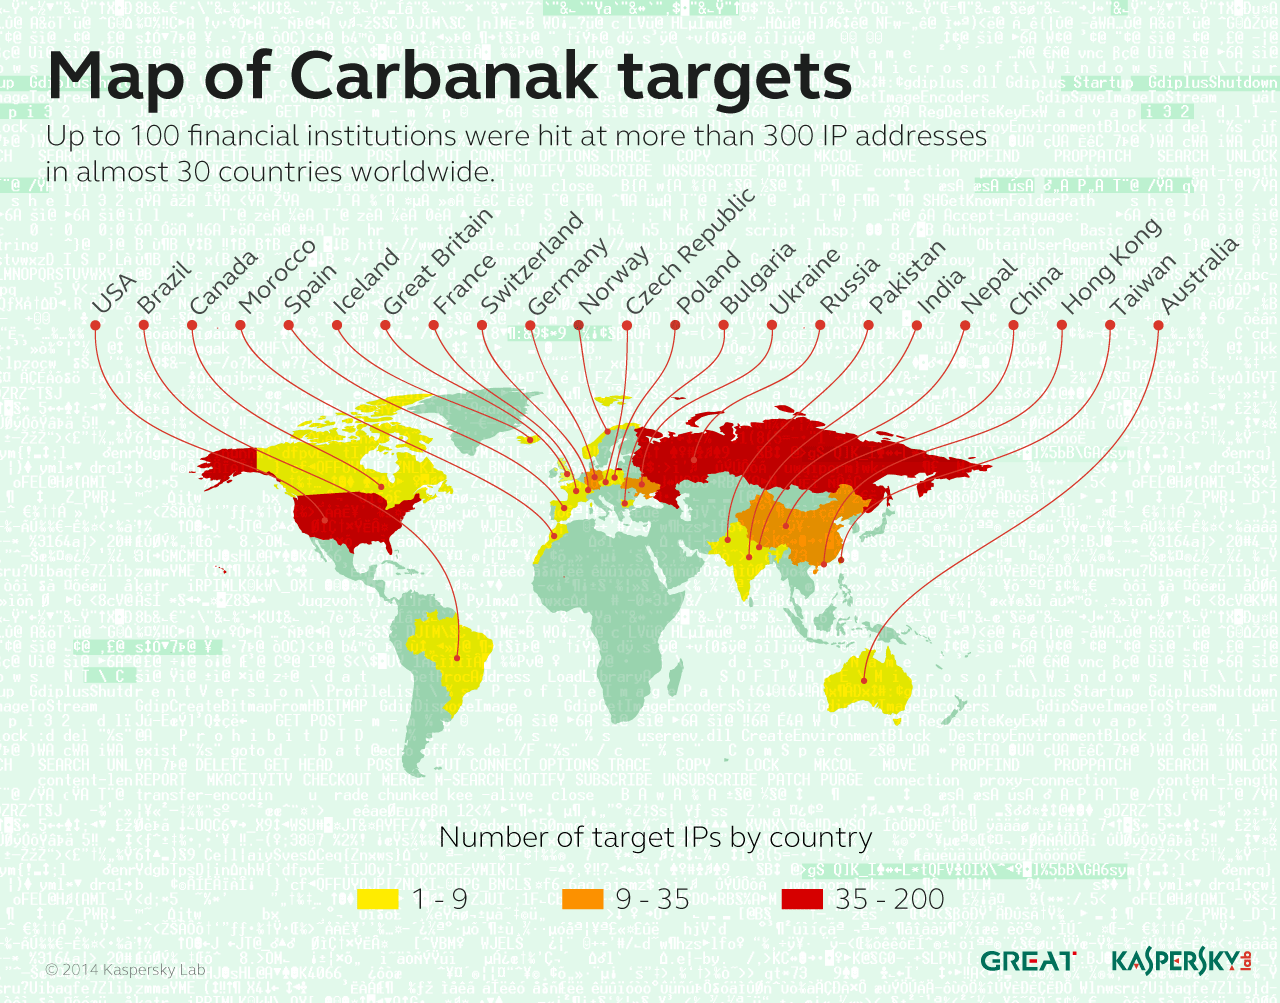 KL_infographic_carbanak_map_of_targets